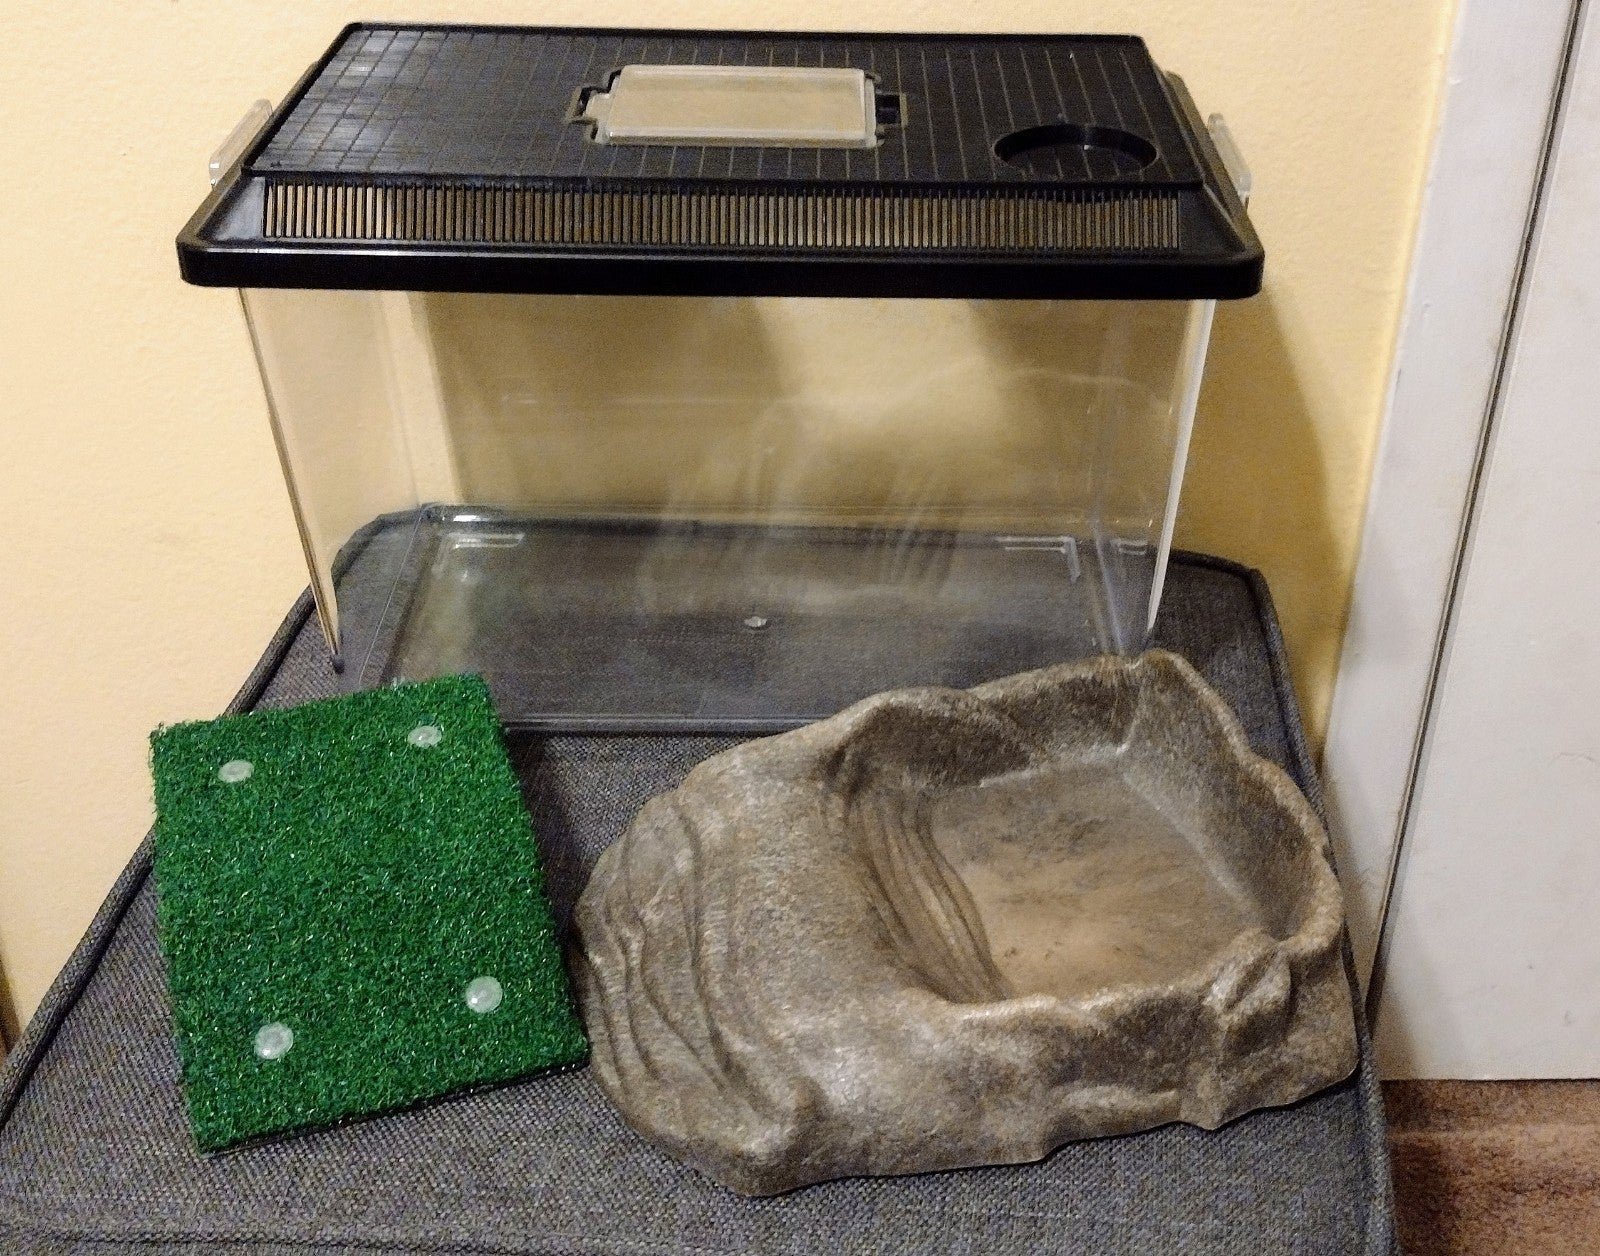 Reptile supplies and accessories; tank water dish and r